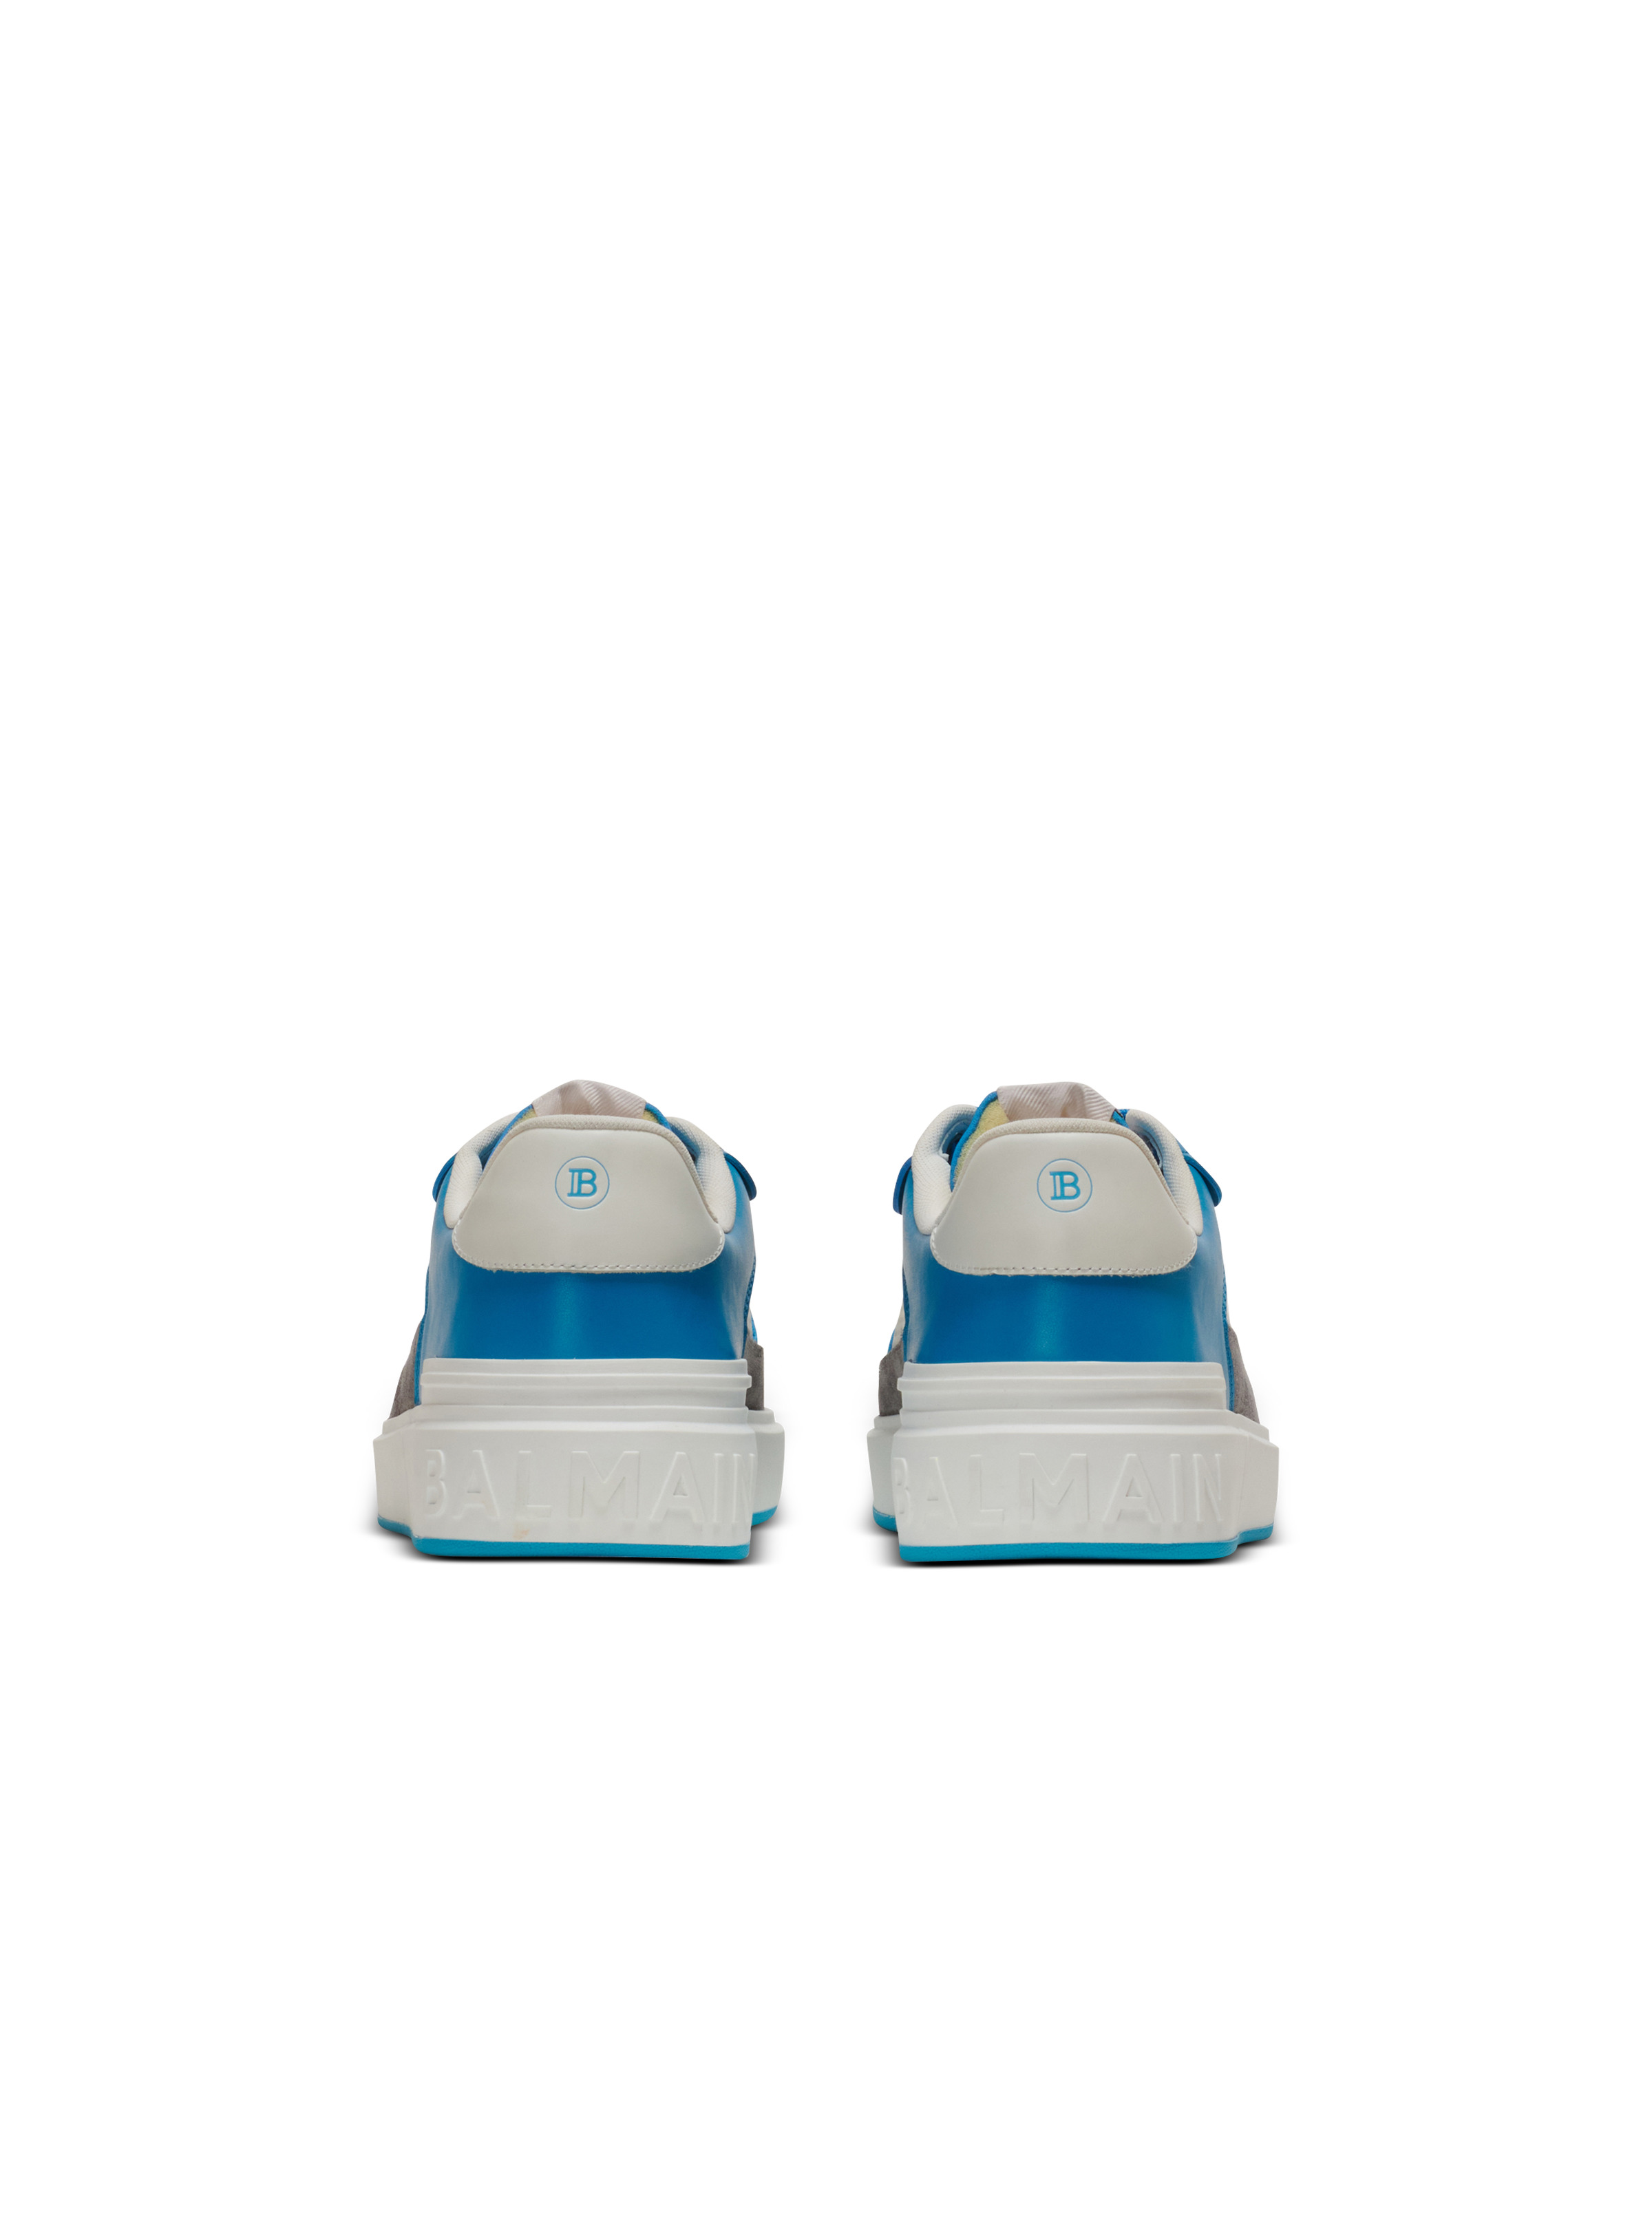 B-Court Flip trainers in calfskin and suede - 5